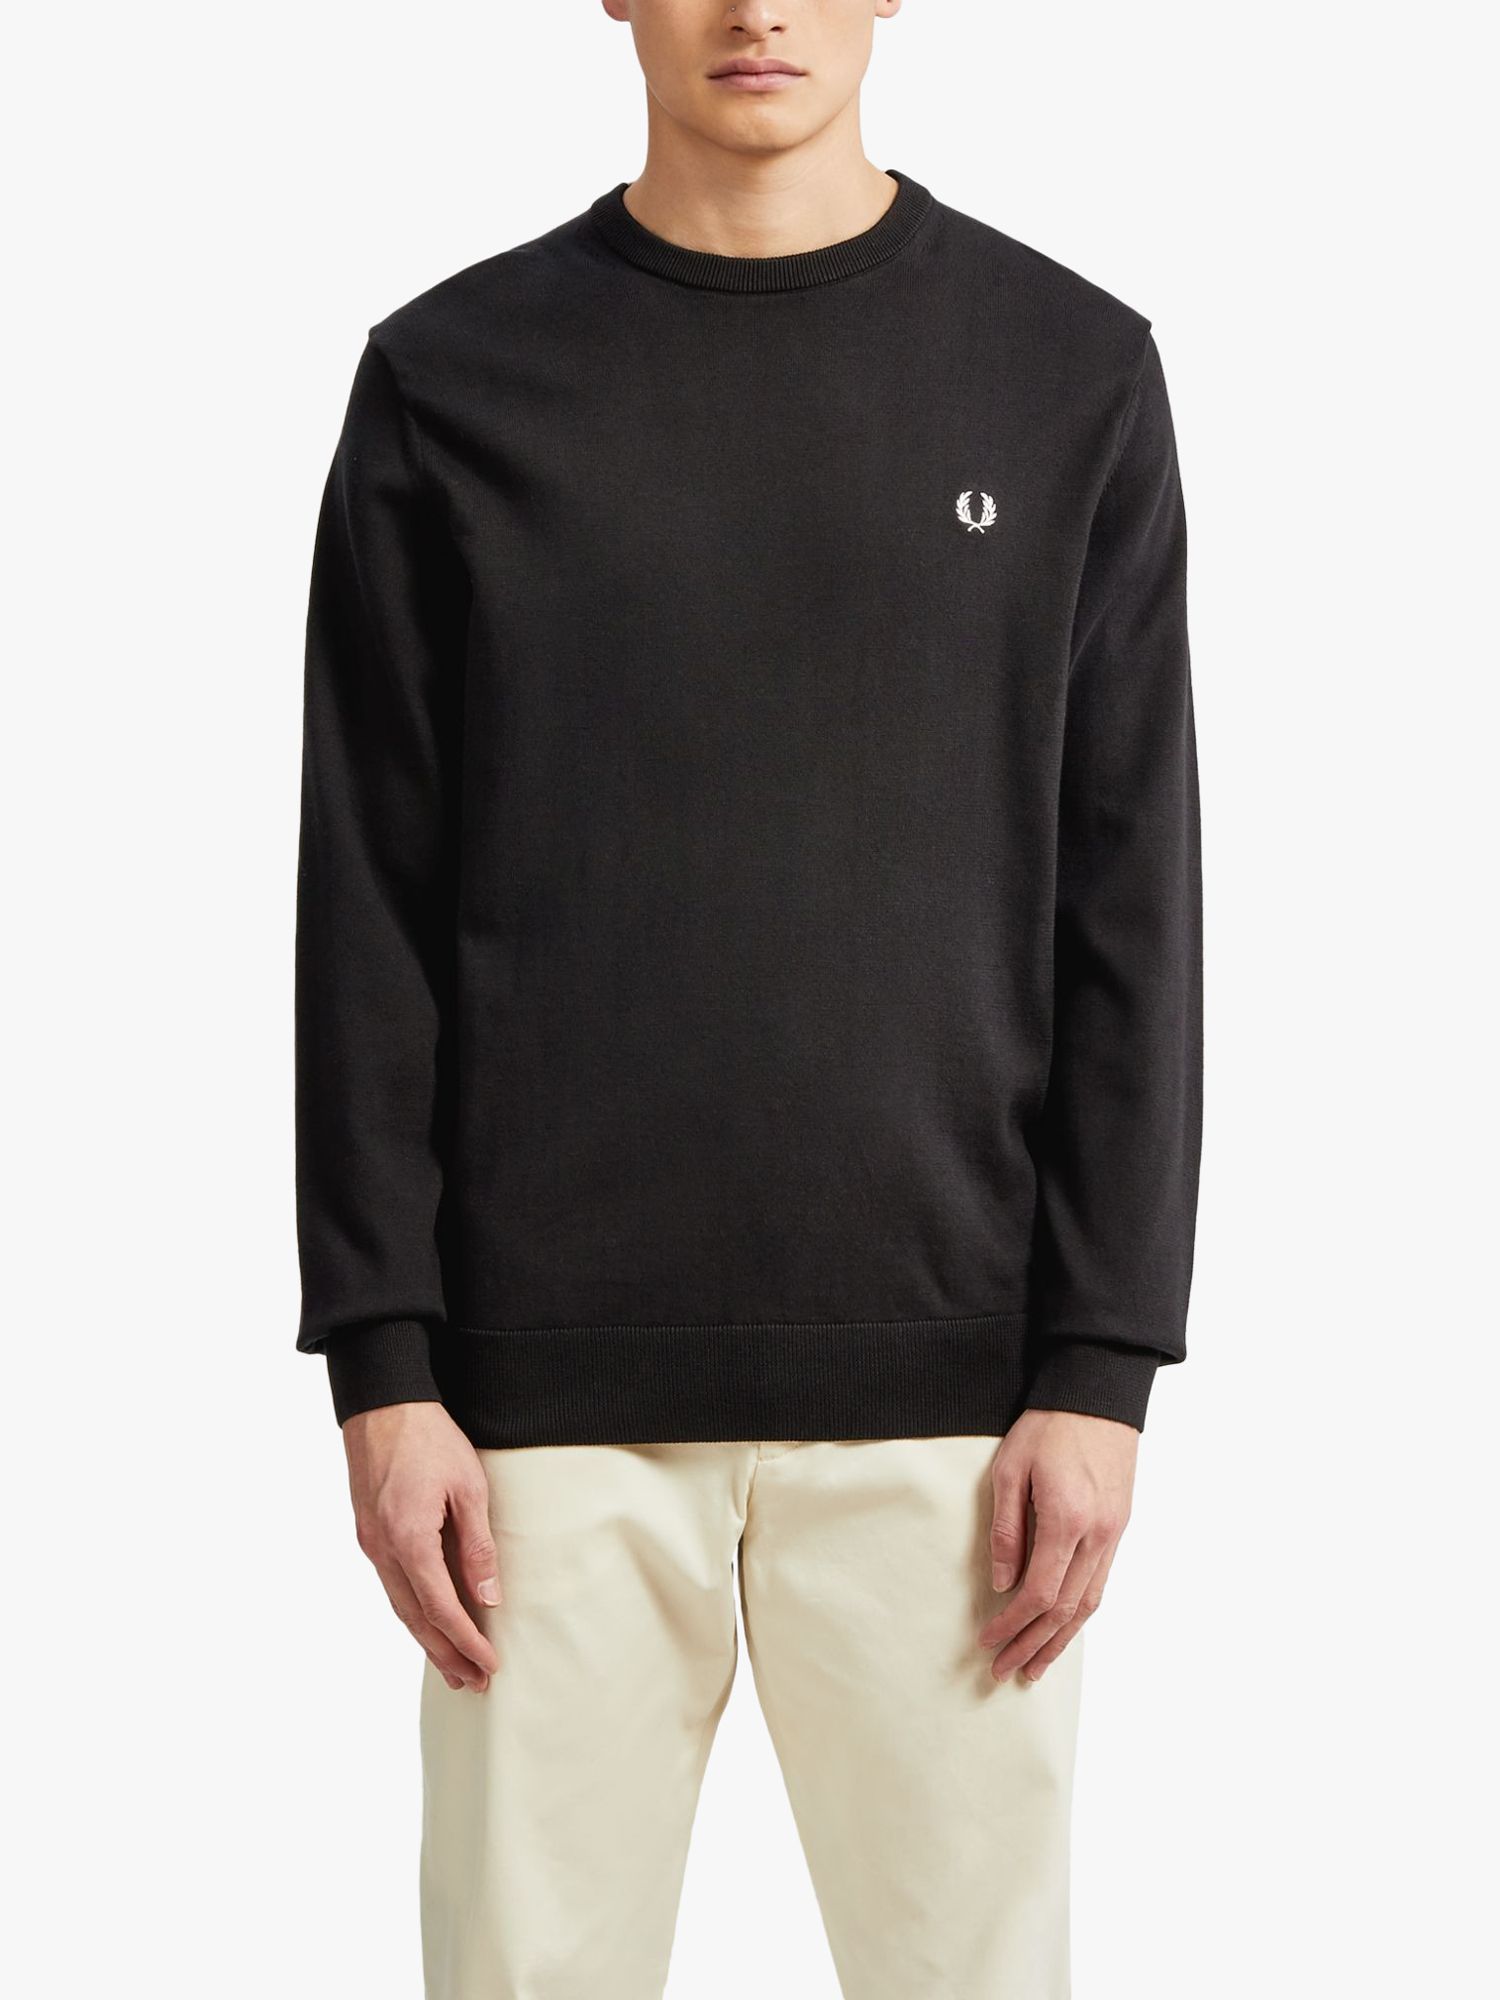 Fred Perry Classic Crew Neck Knit Jumper, Black at John Lewis ...